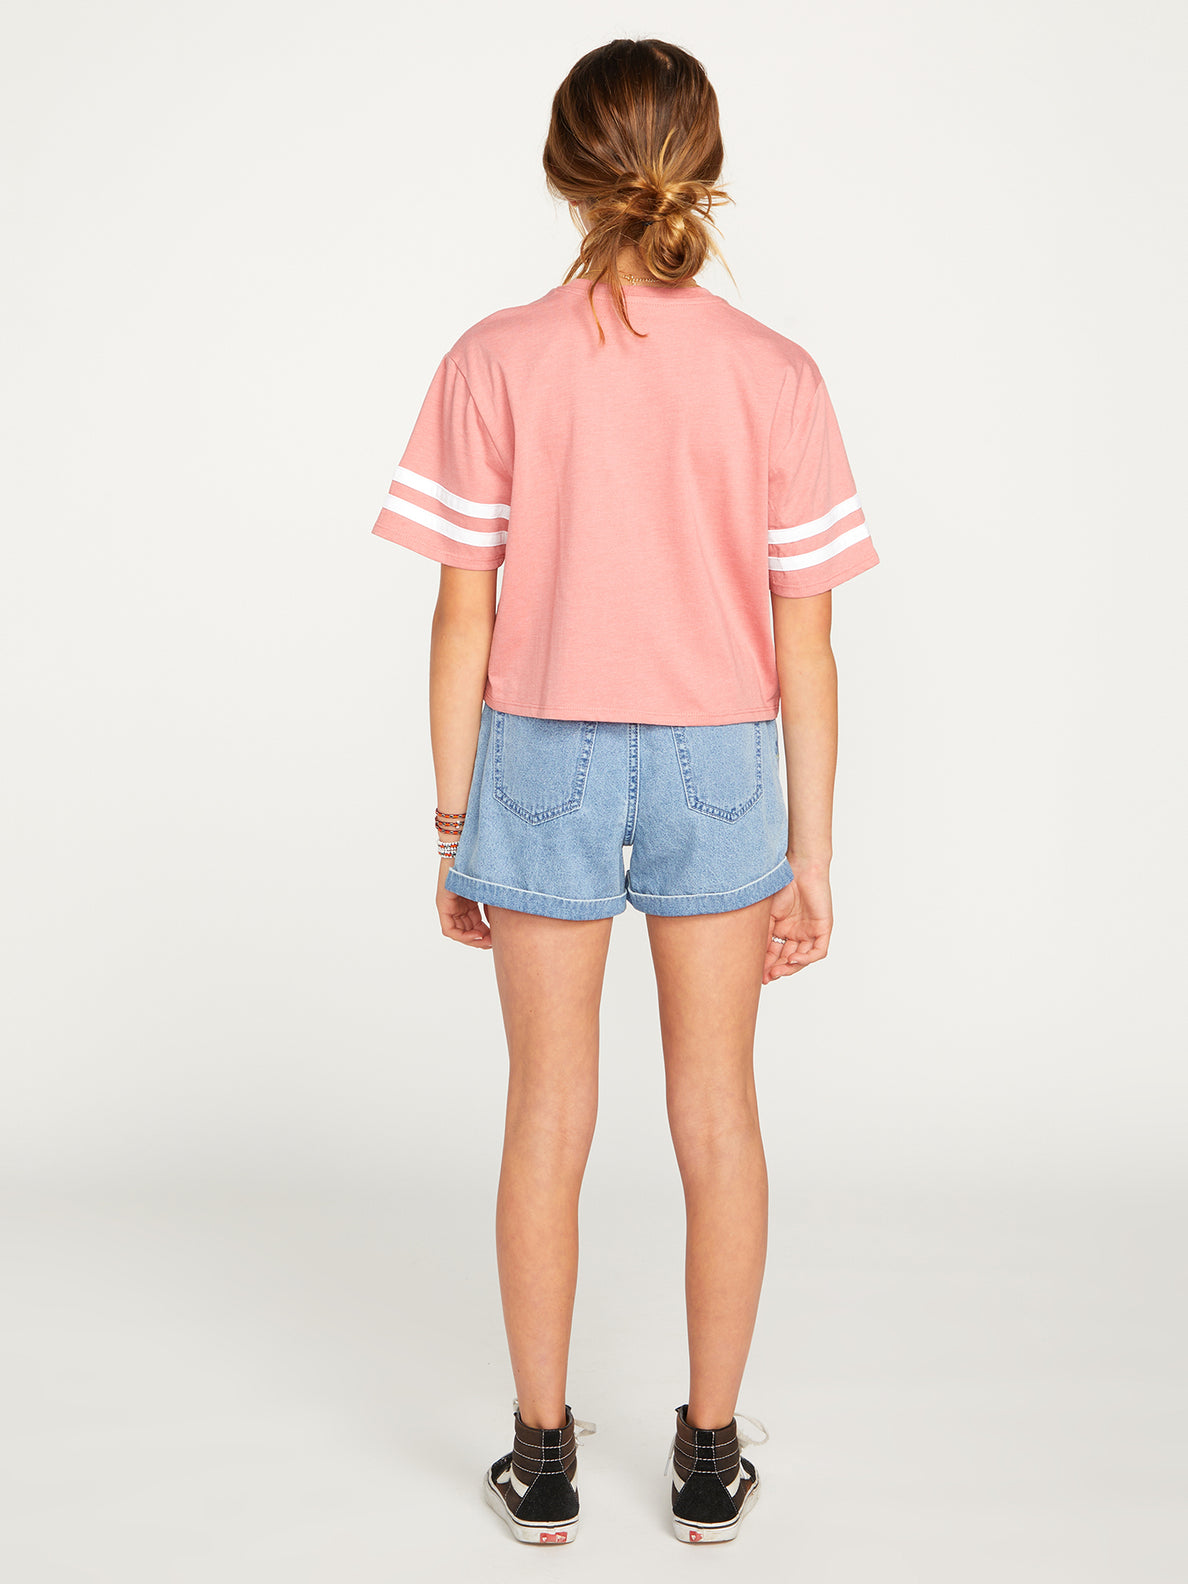 Girls Truly Stoked Tee - Desert Pink (R3512303_DSP) [2]